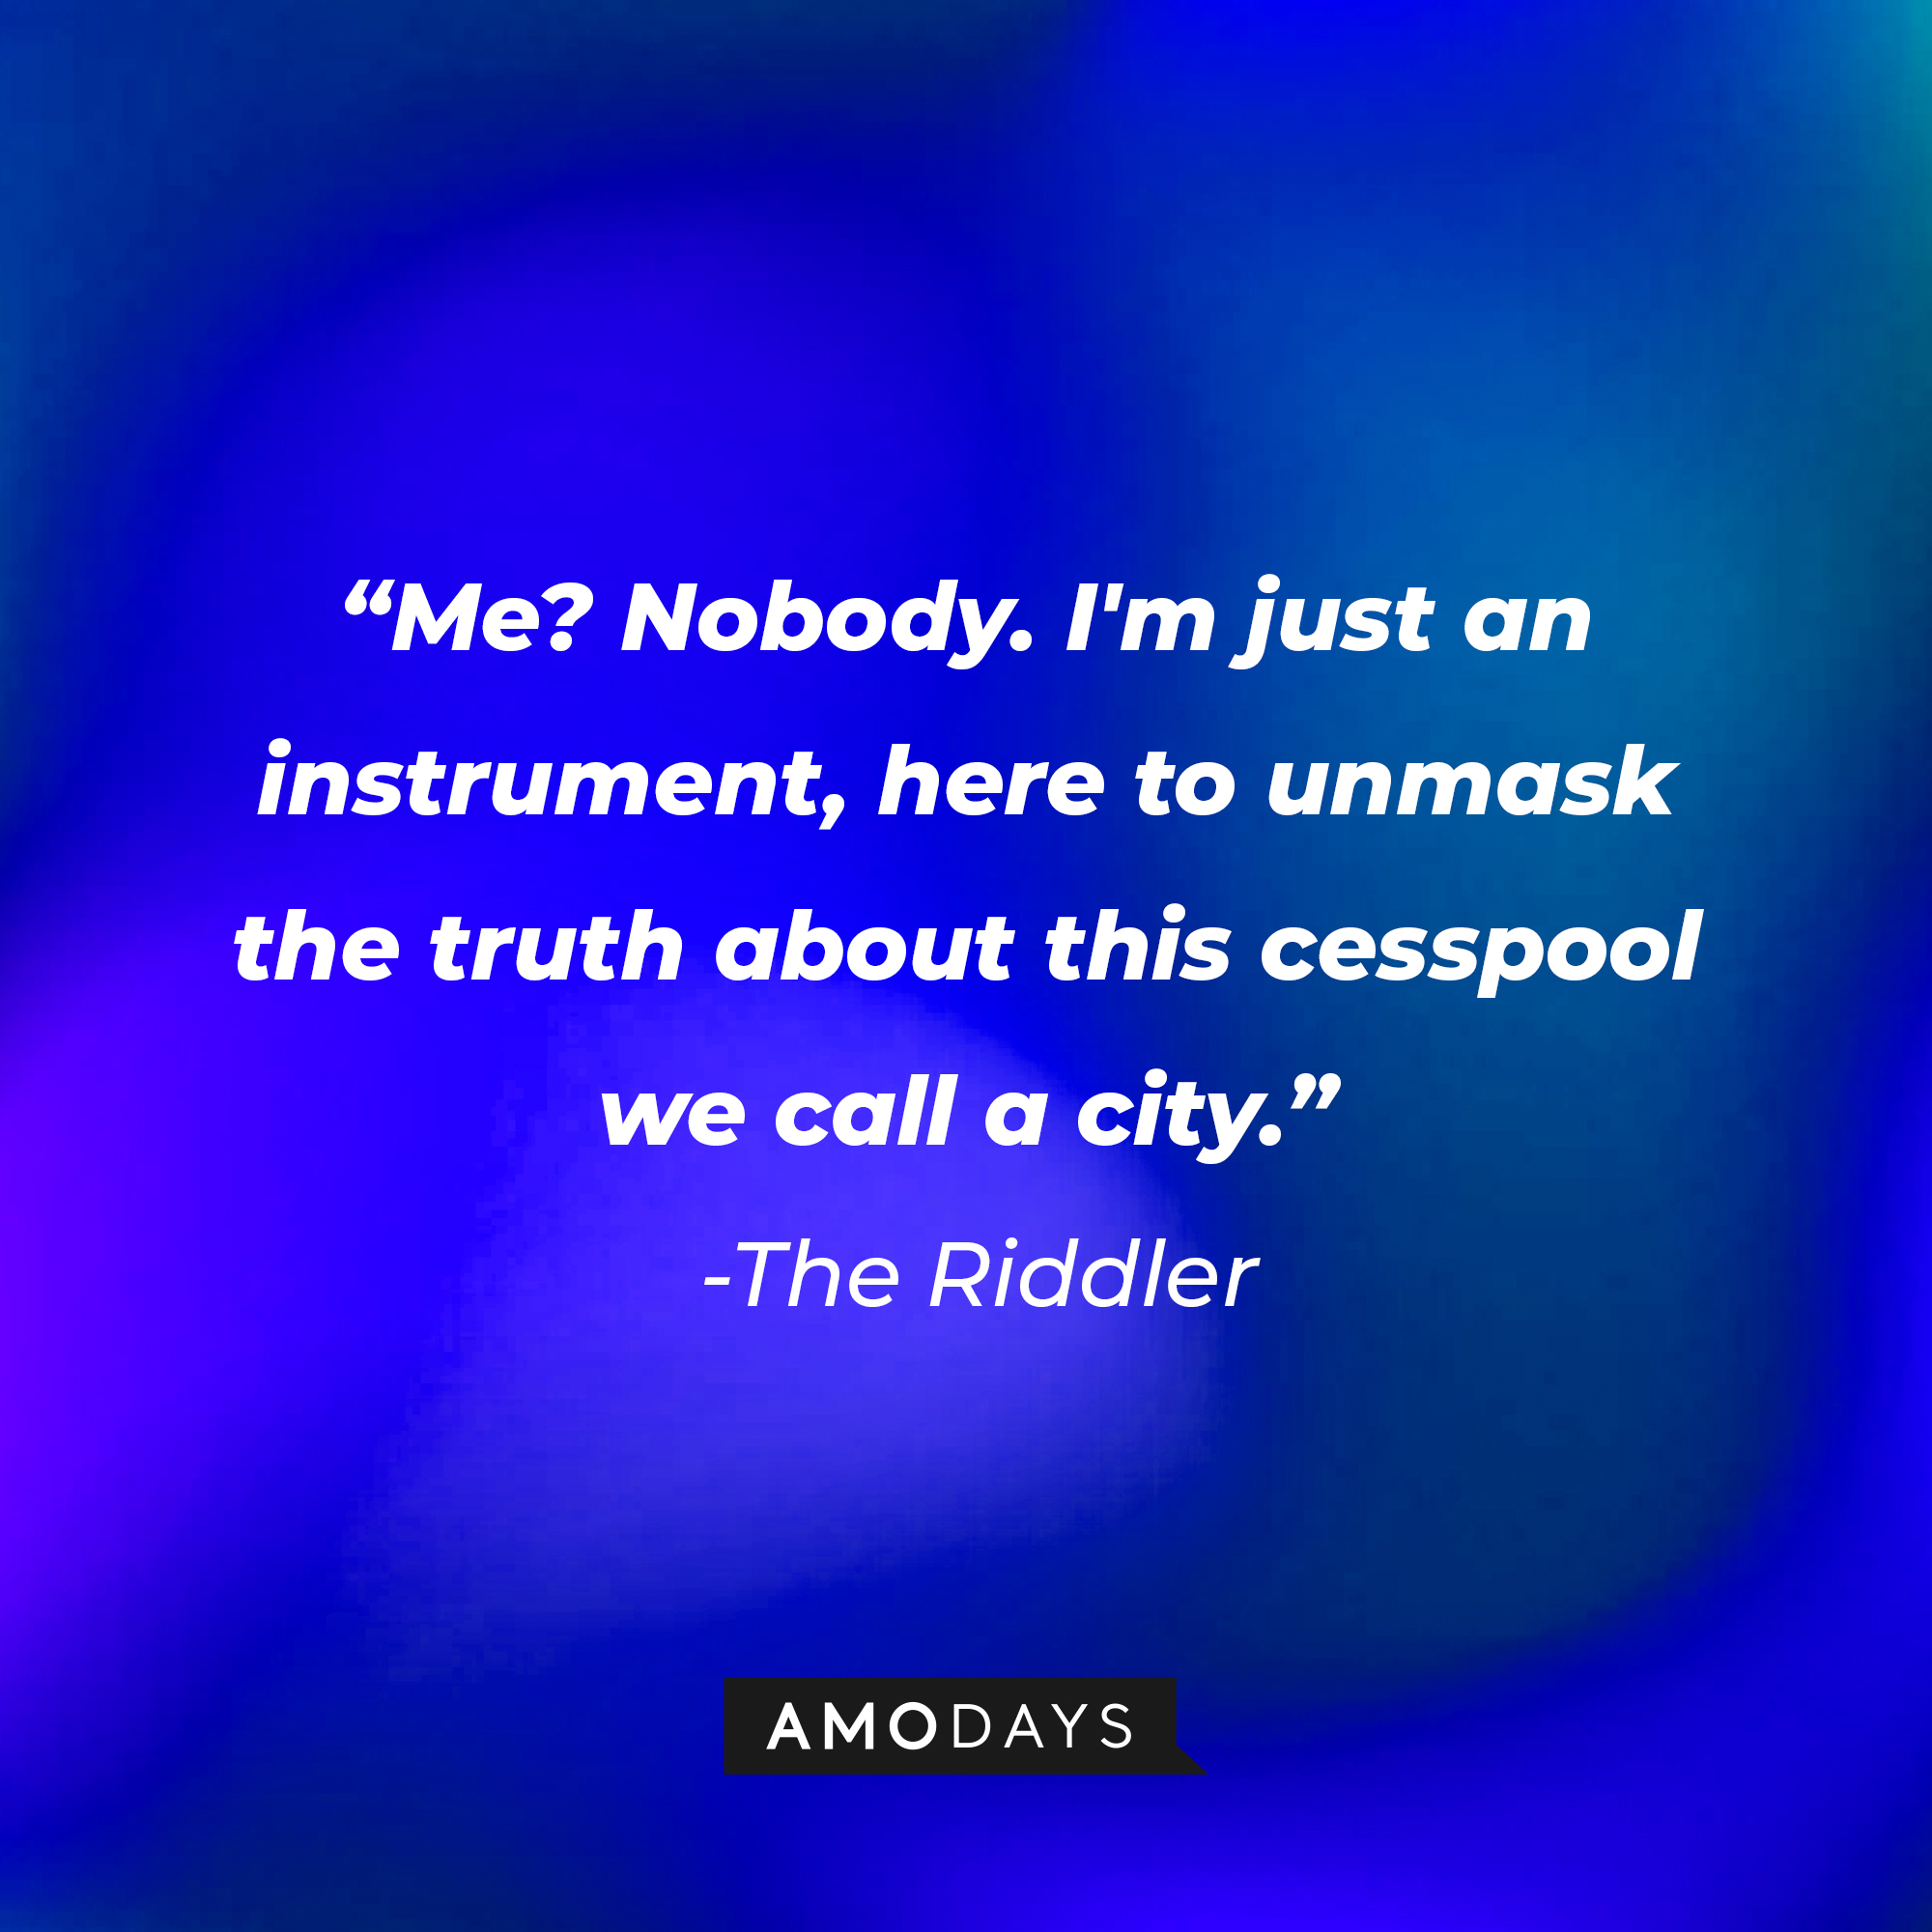 The Riddler's quote: “Me? Nobody. I'm just an instrument, here to unmask the truth about this cesspool we call a city.” | Amodays